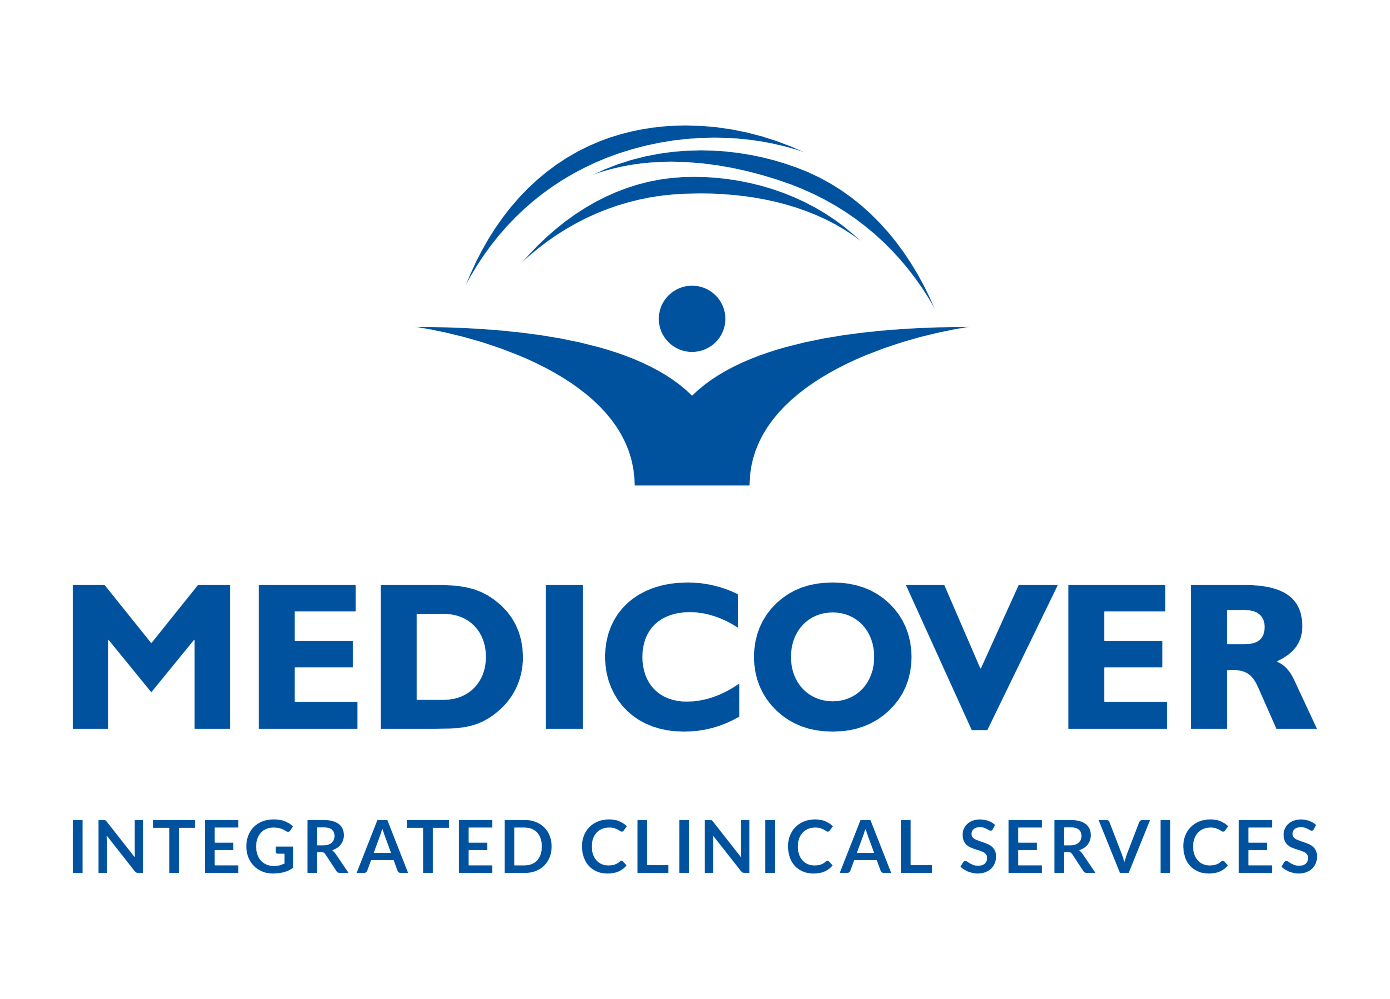 Medicover Integrated Clinical Services